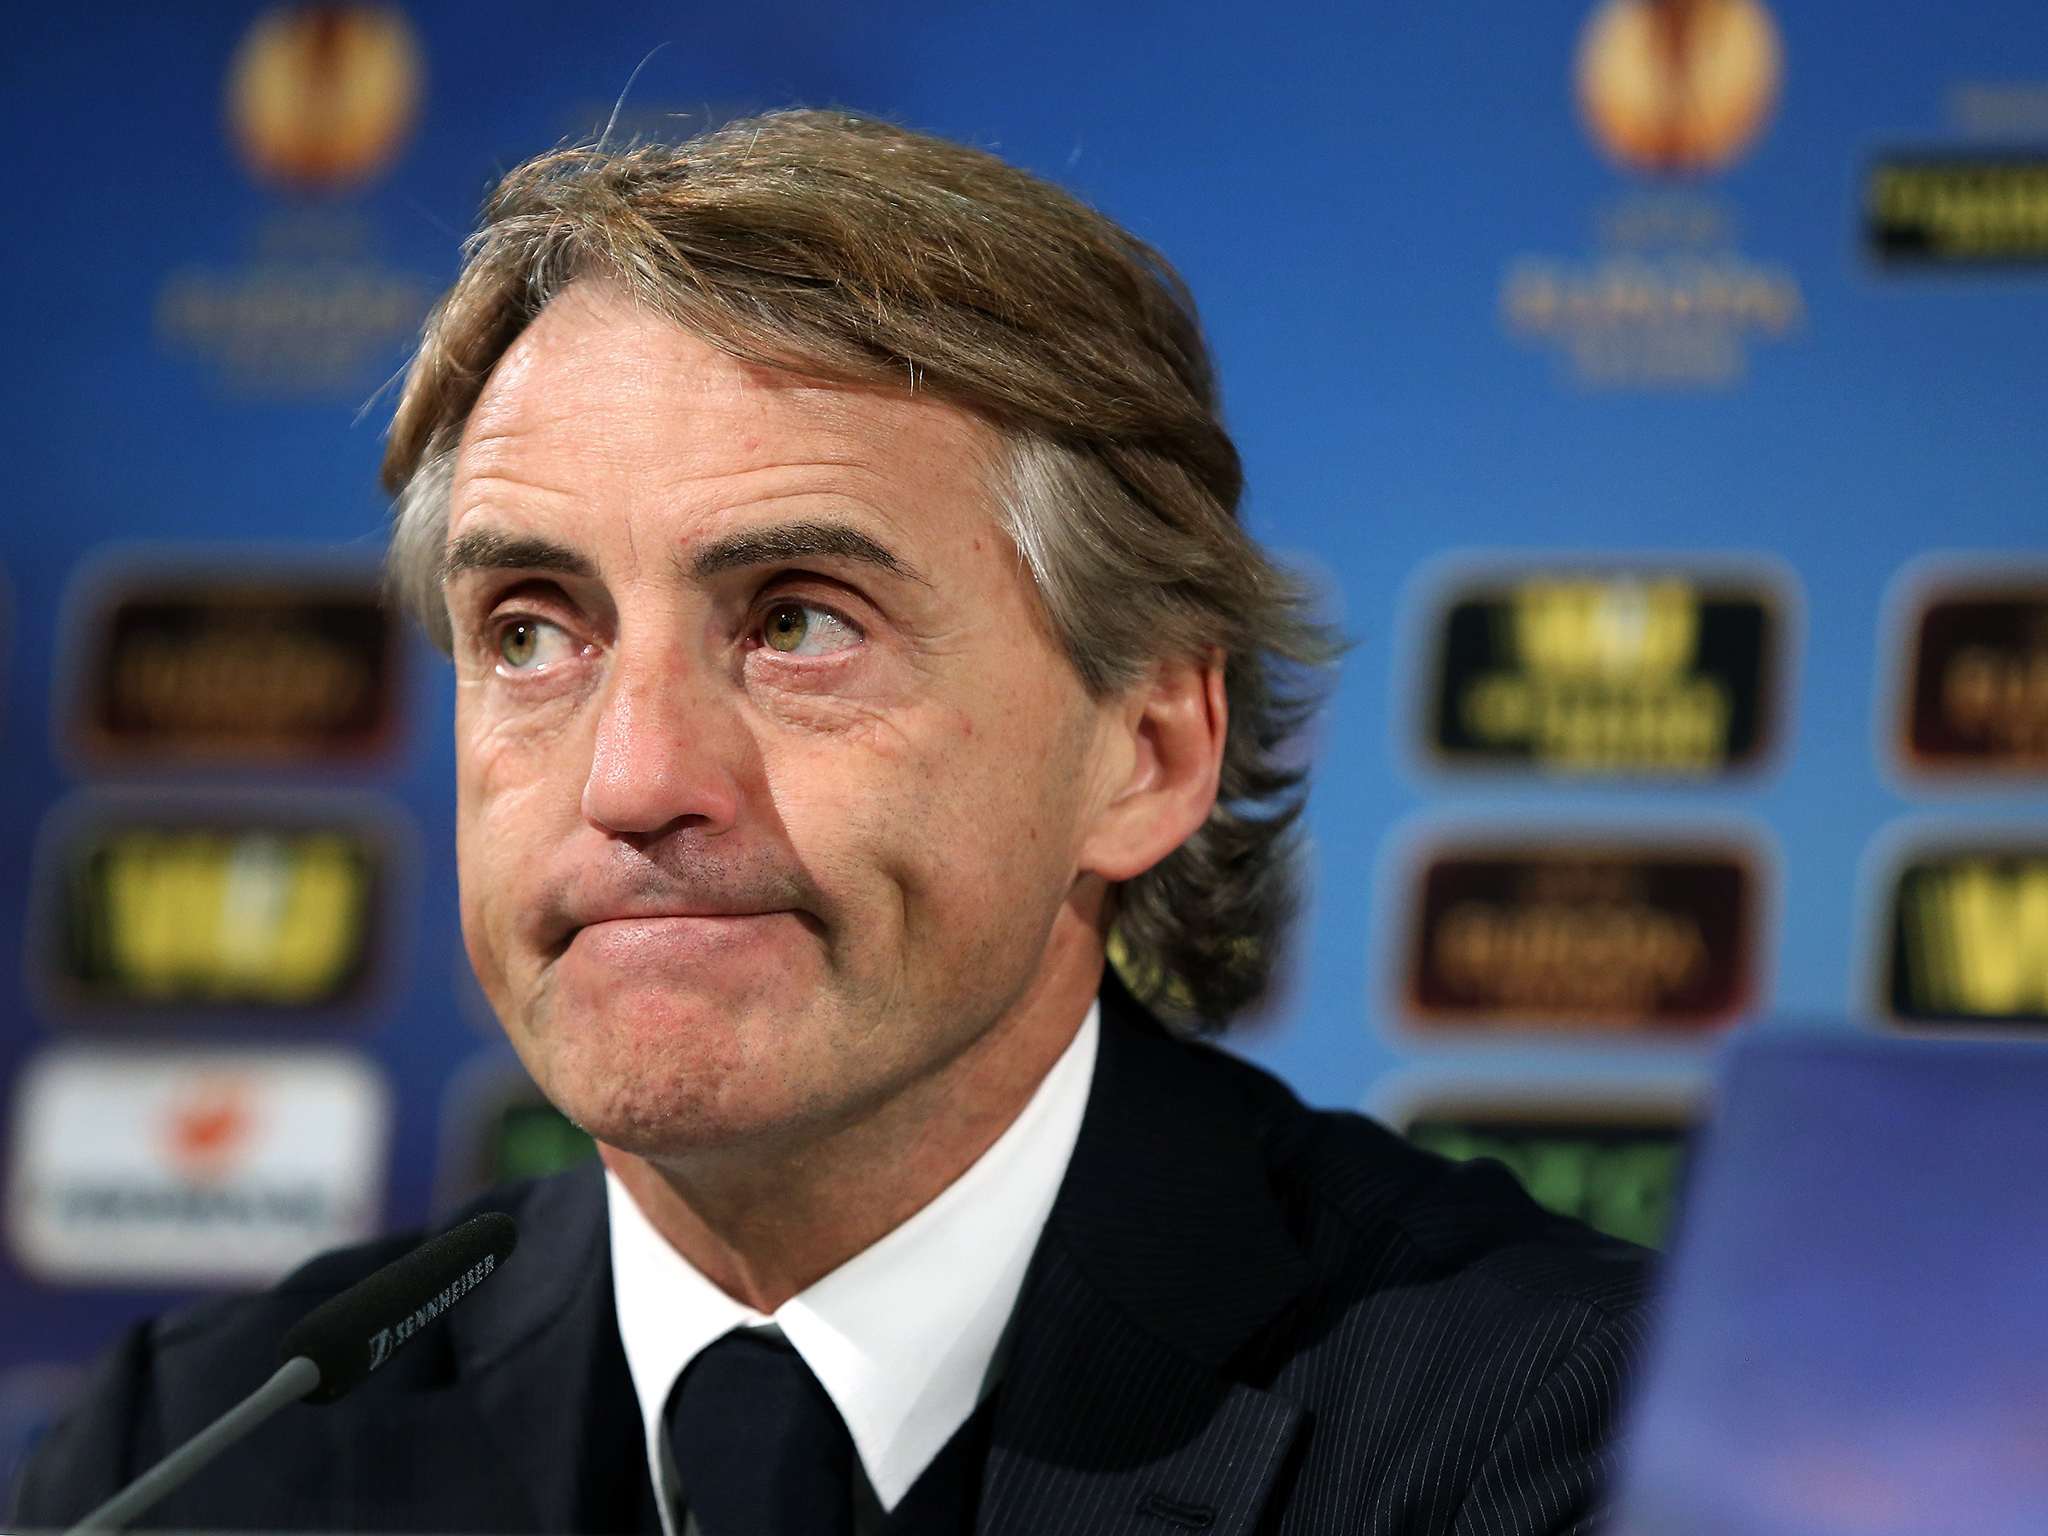 Italy Coach Roberto Mancini: “I Don’t Know Who Will Win Out Of AC Milan & Inter, Whoever Does Will Deserve It”